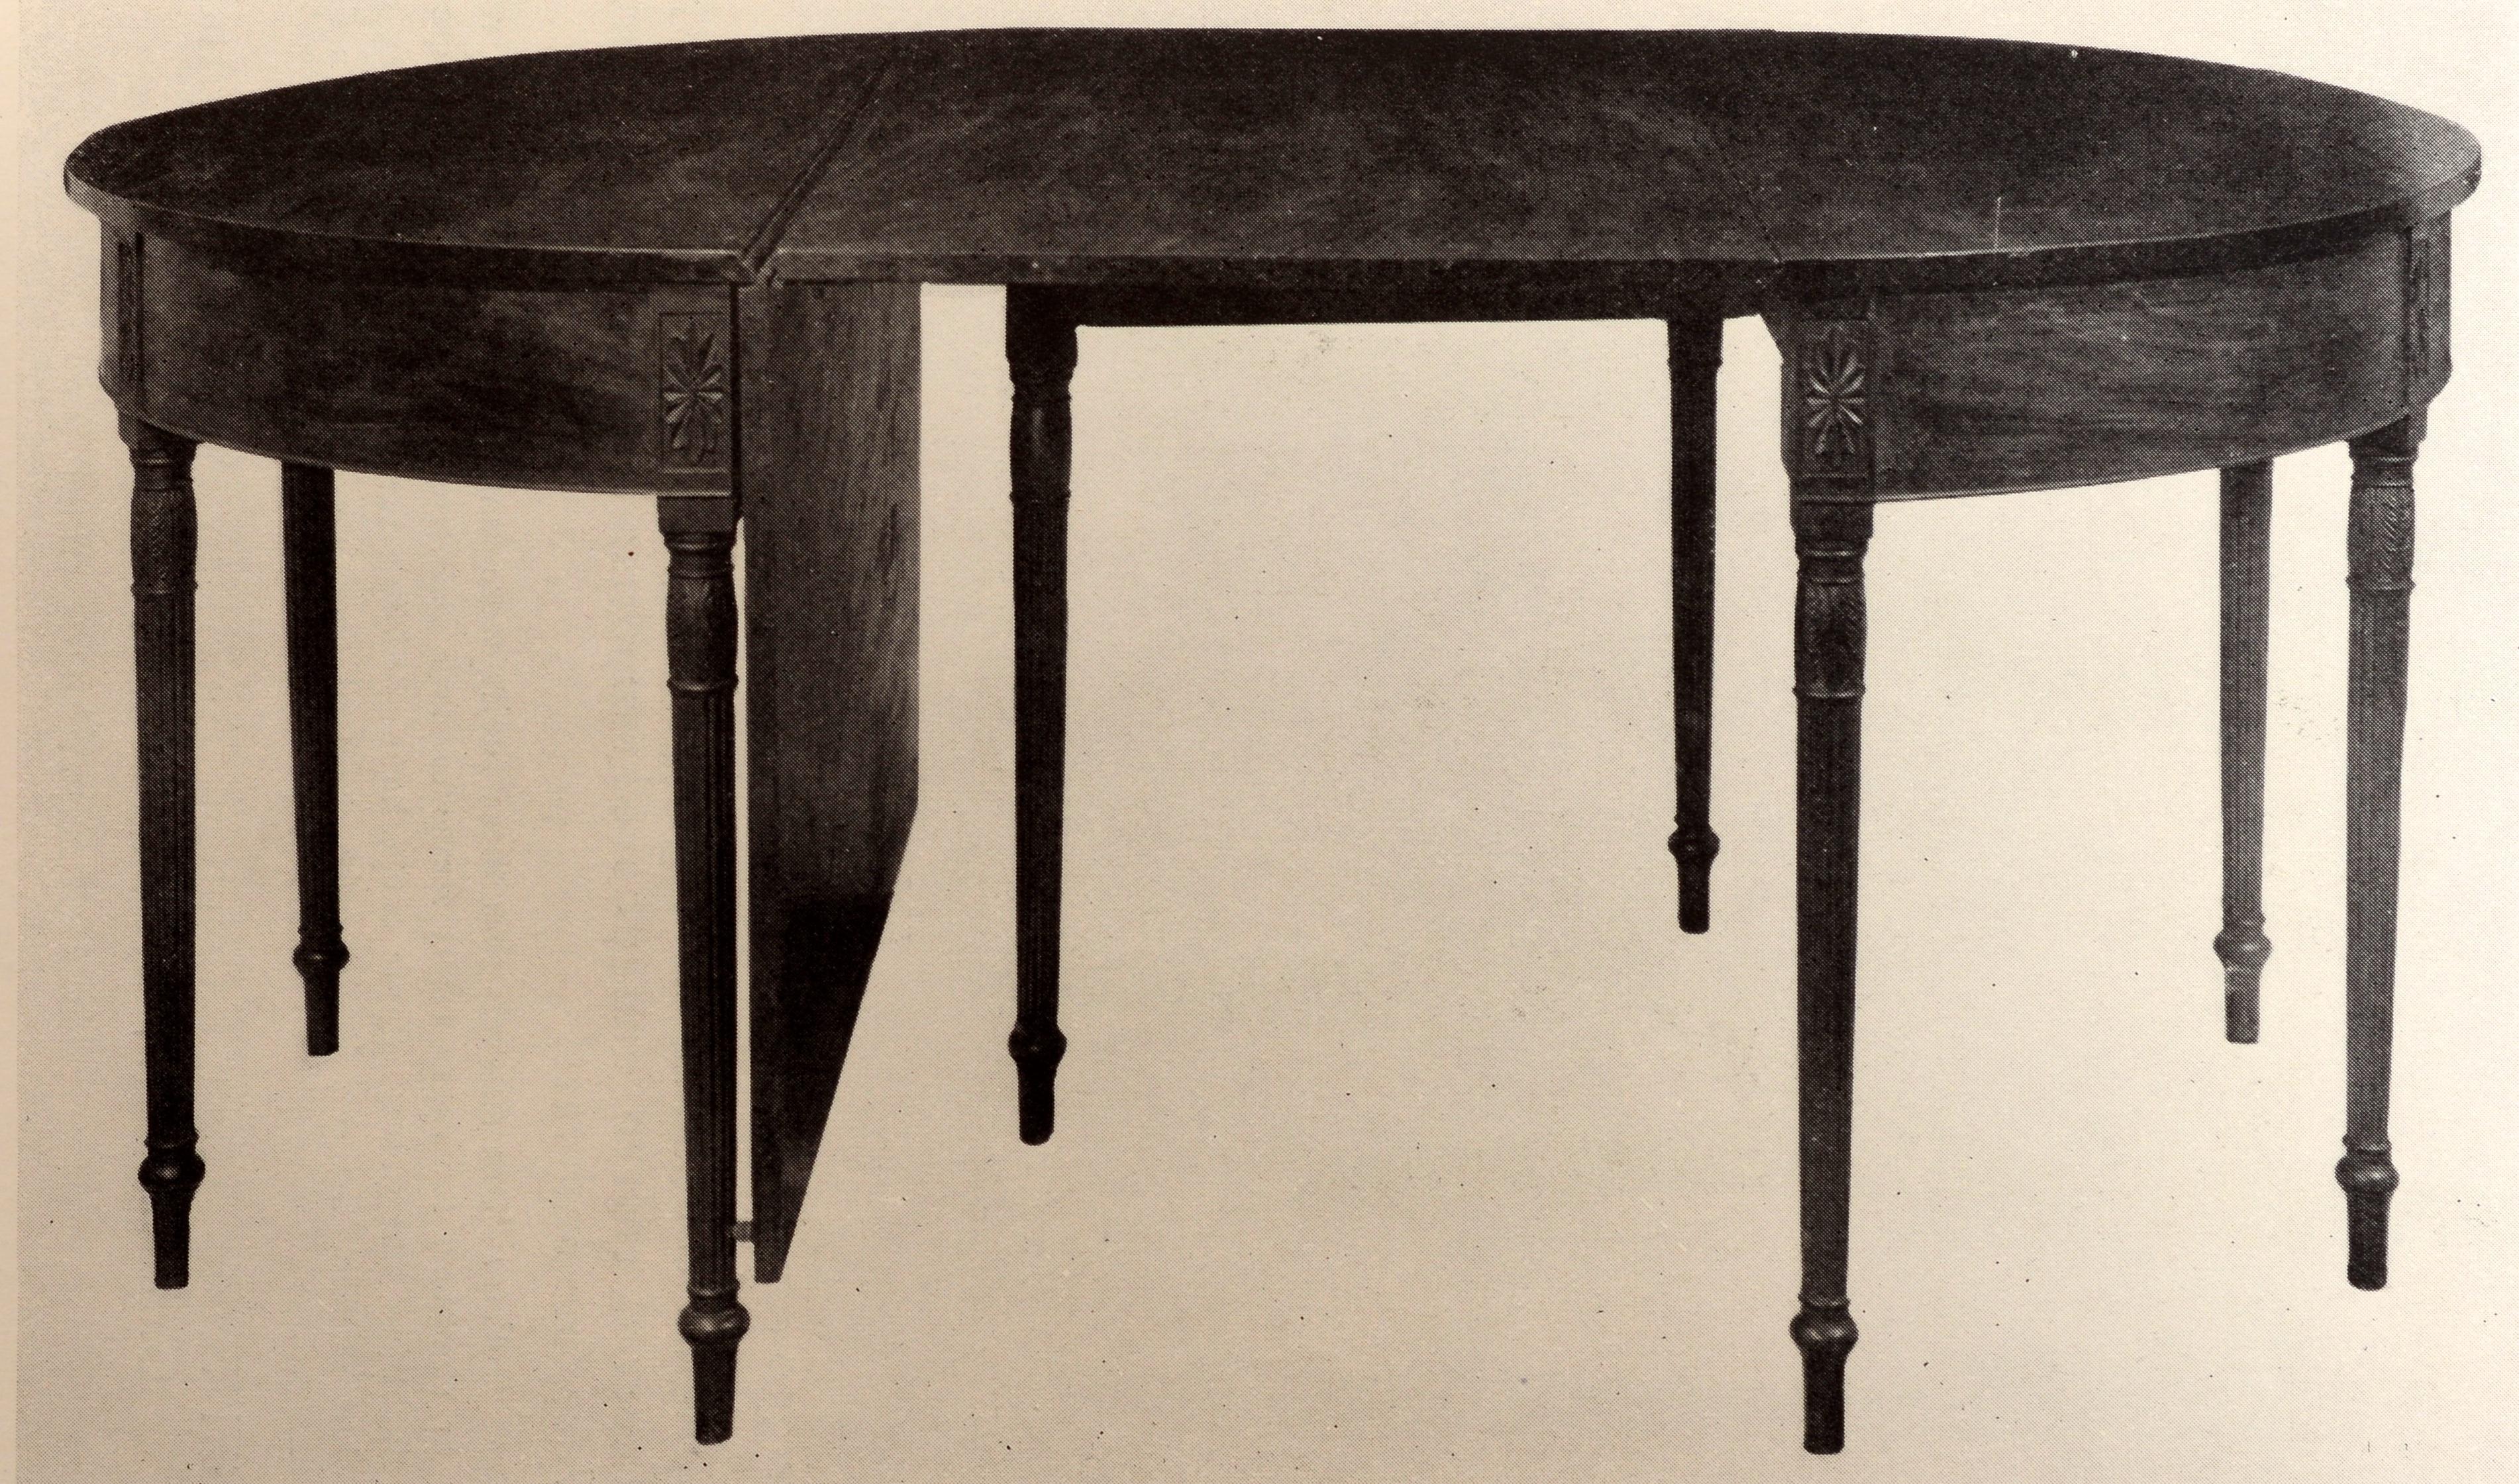 Paper Auction, Private Collection of Louis Myers, Featuring Duncan Phyfe Furniture For Sale